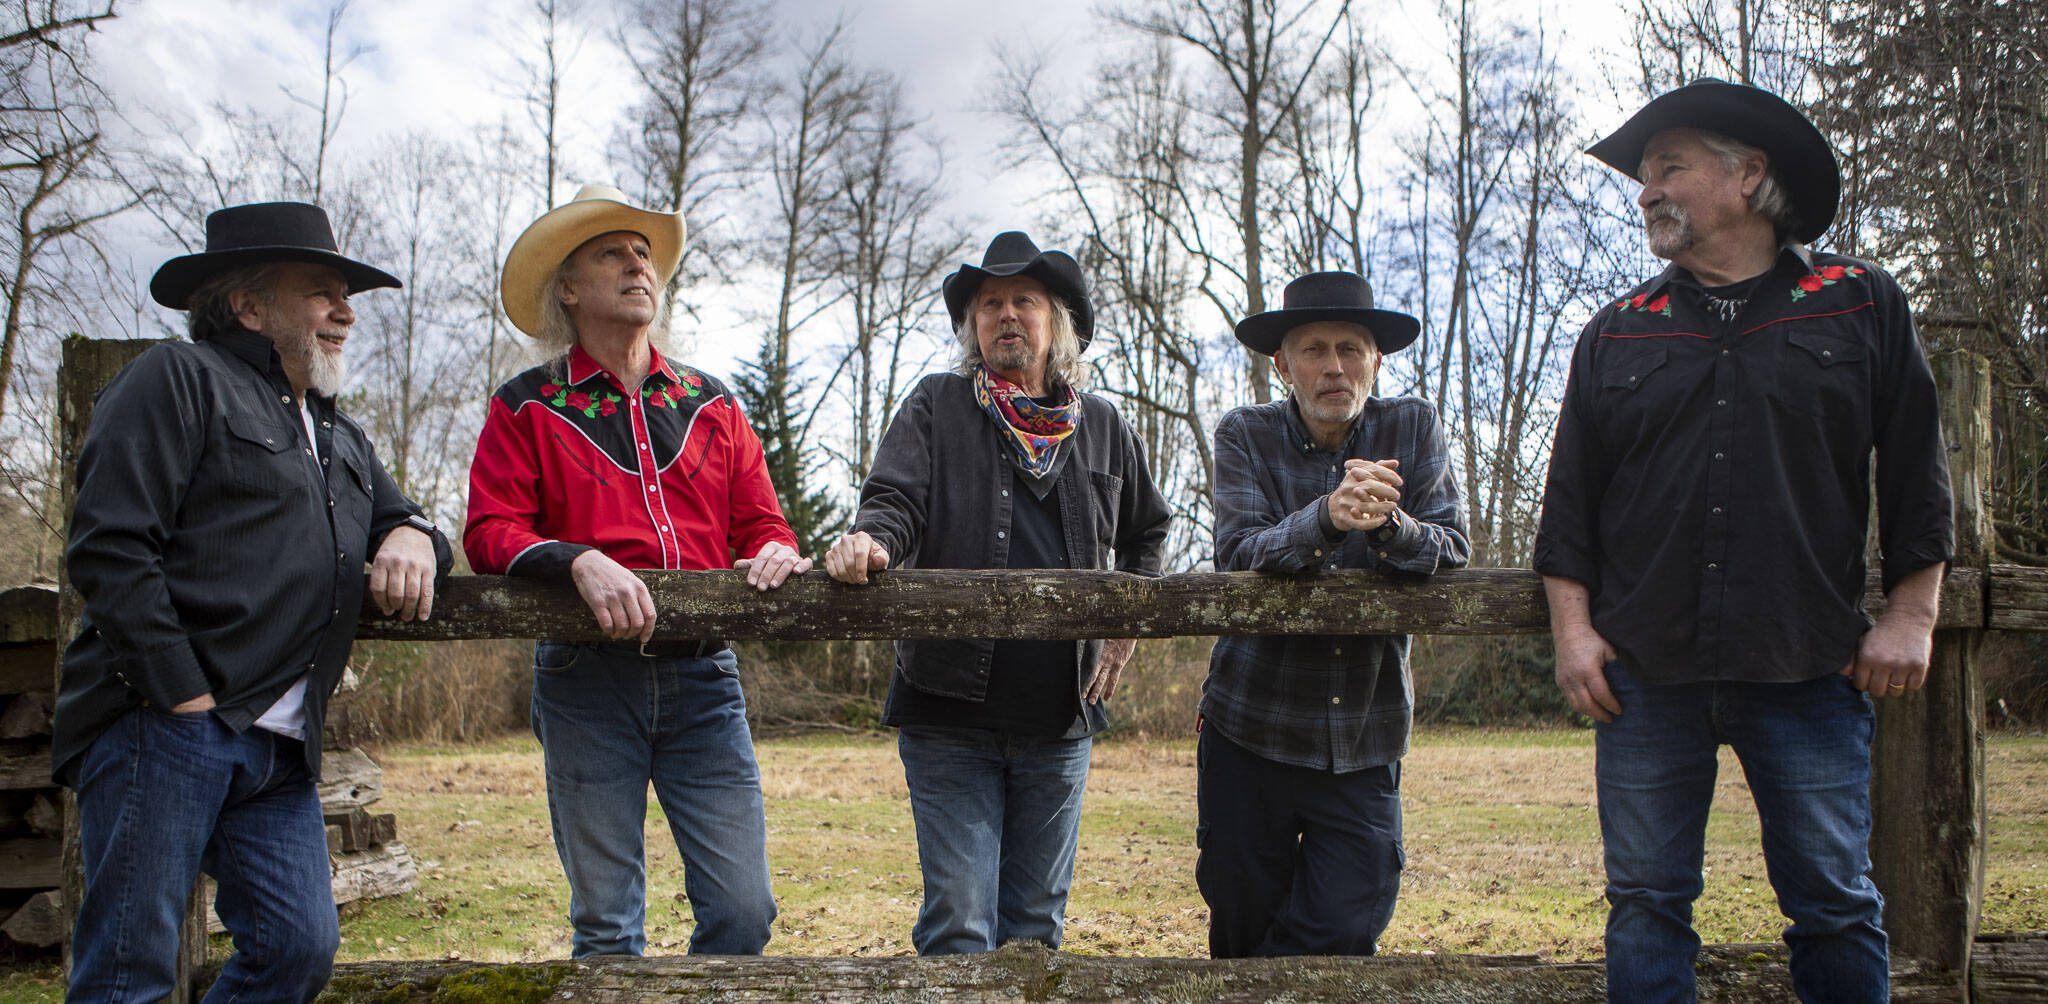 Left to right, Lonnie Mueller, Jim Kehoe, Dennis Coile also known as “Dan Canyon,” Paul Buchignani and Pete Frothingham pose for a photo during a Dan Canyon Band rehearsal at their practice barn in Arlington, Washington on Saturday, March 11, 2023. (Annie Barker / The Herald)